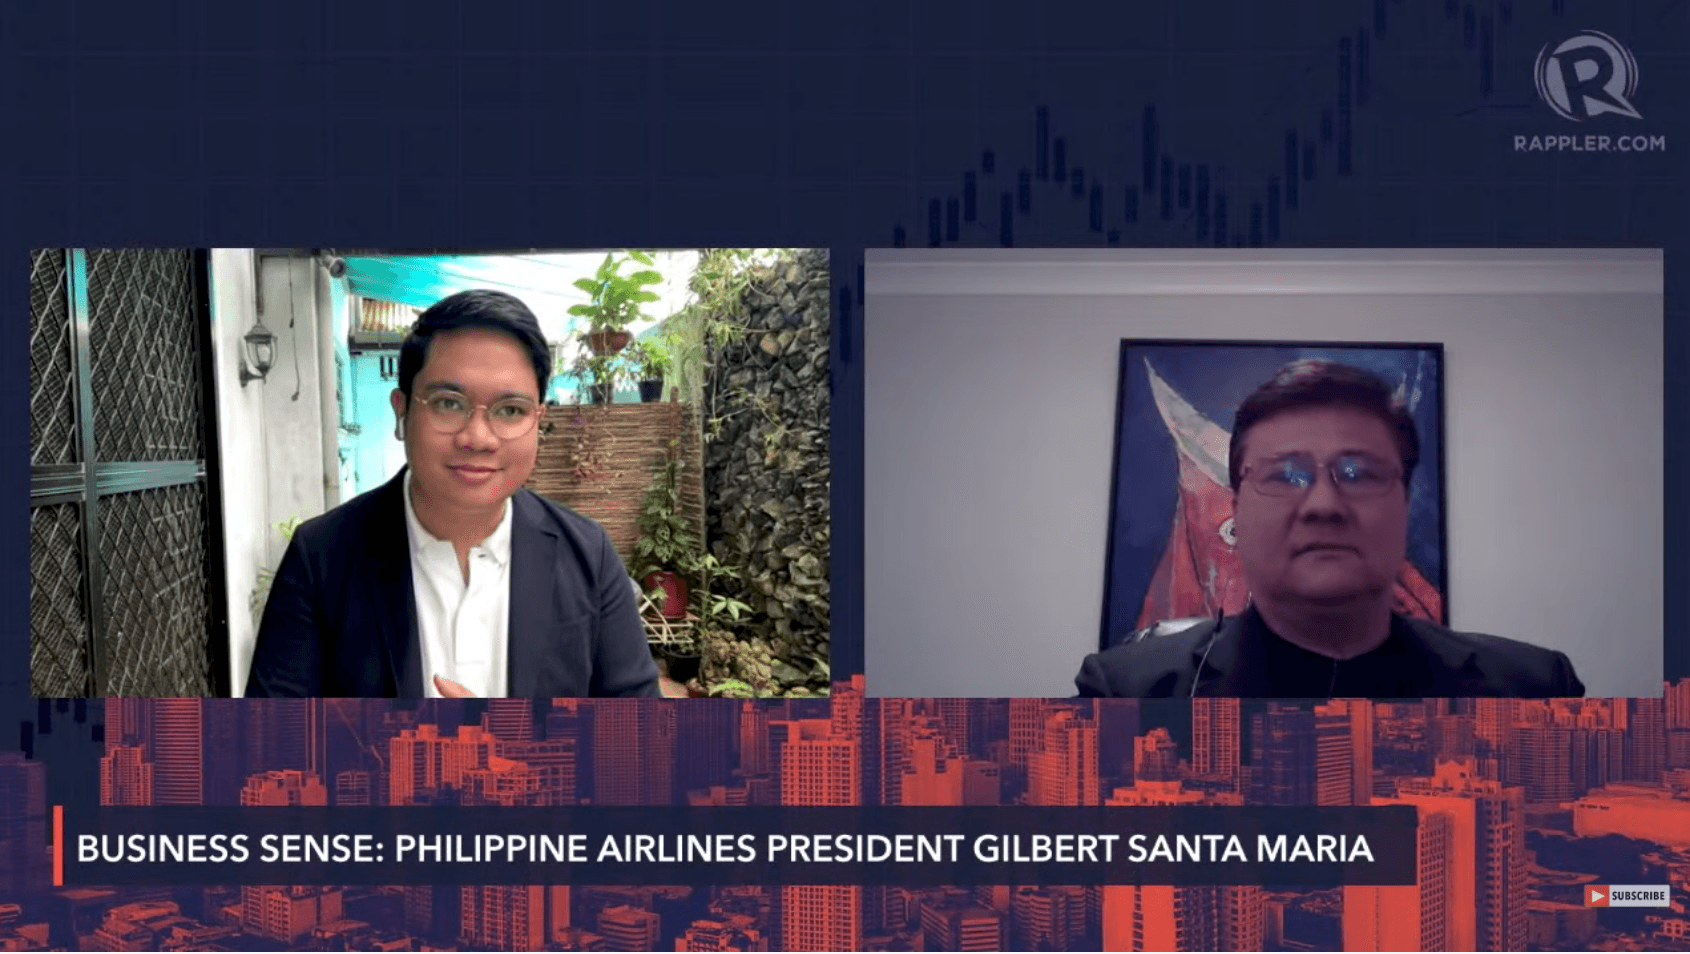 Quitting was never an option, says Philippine Airlines president